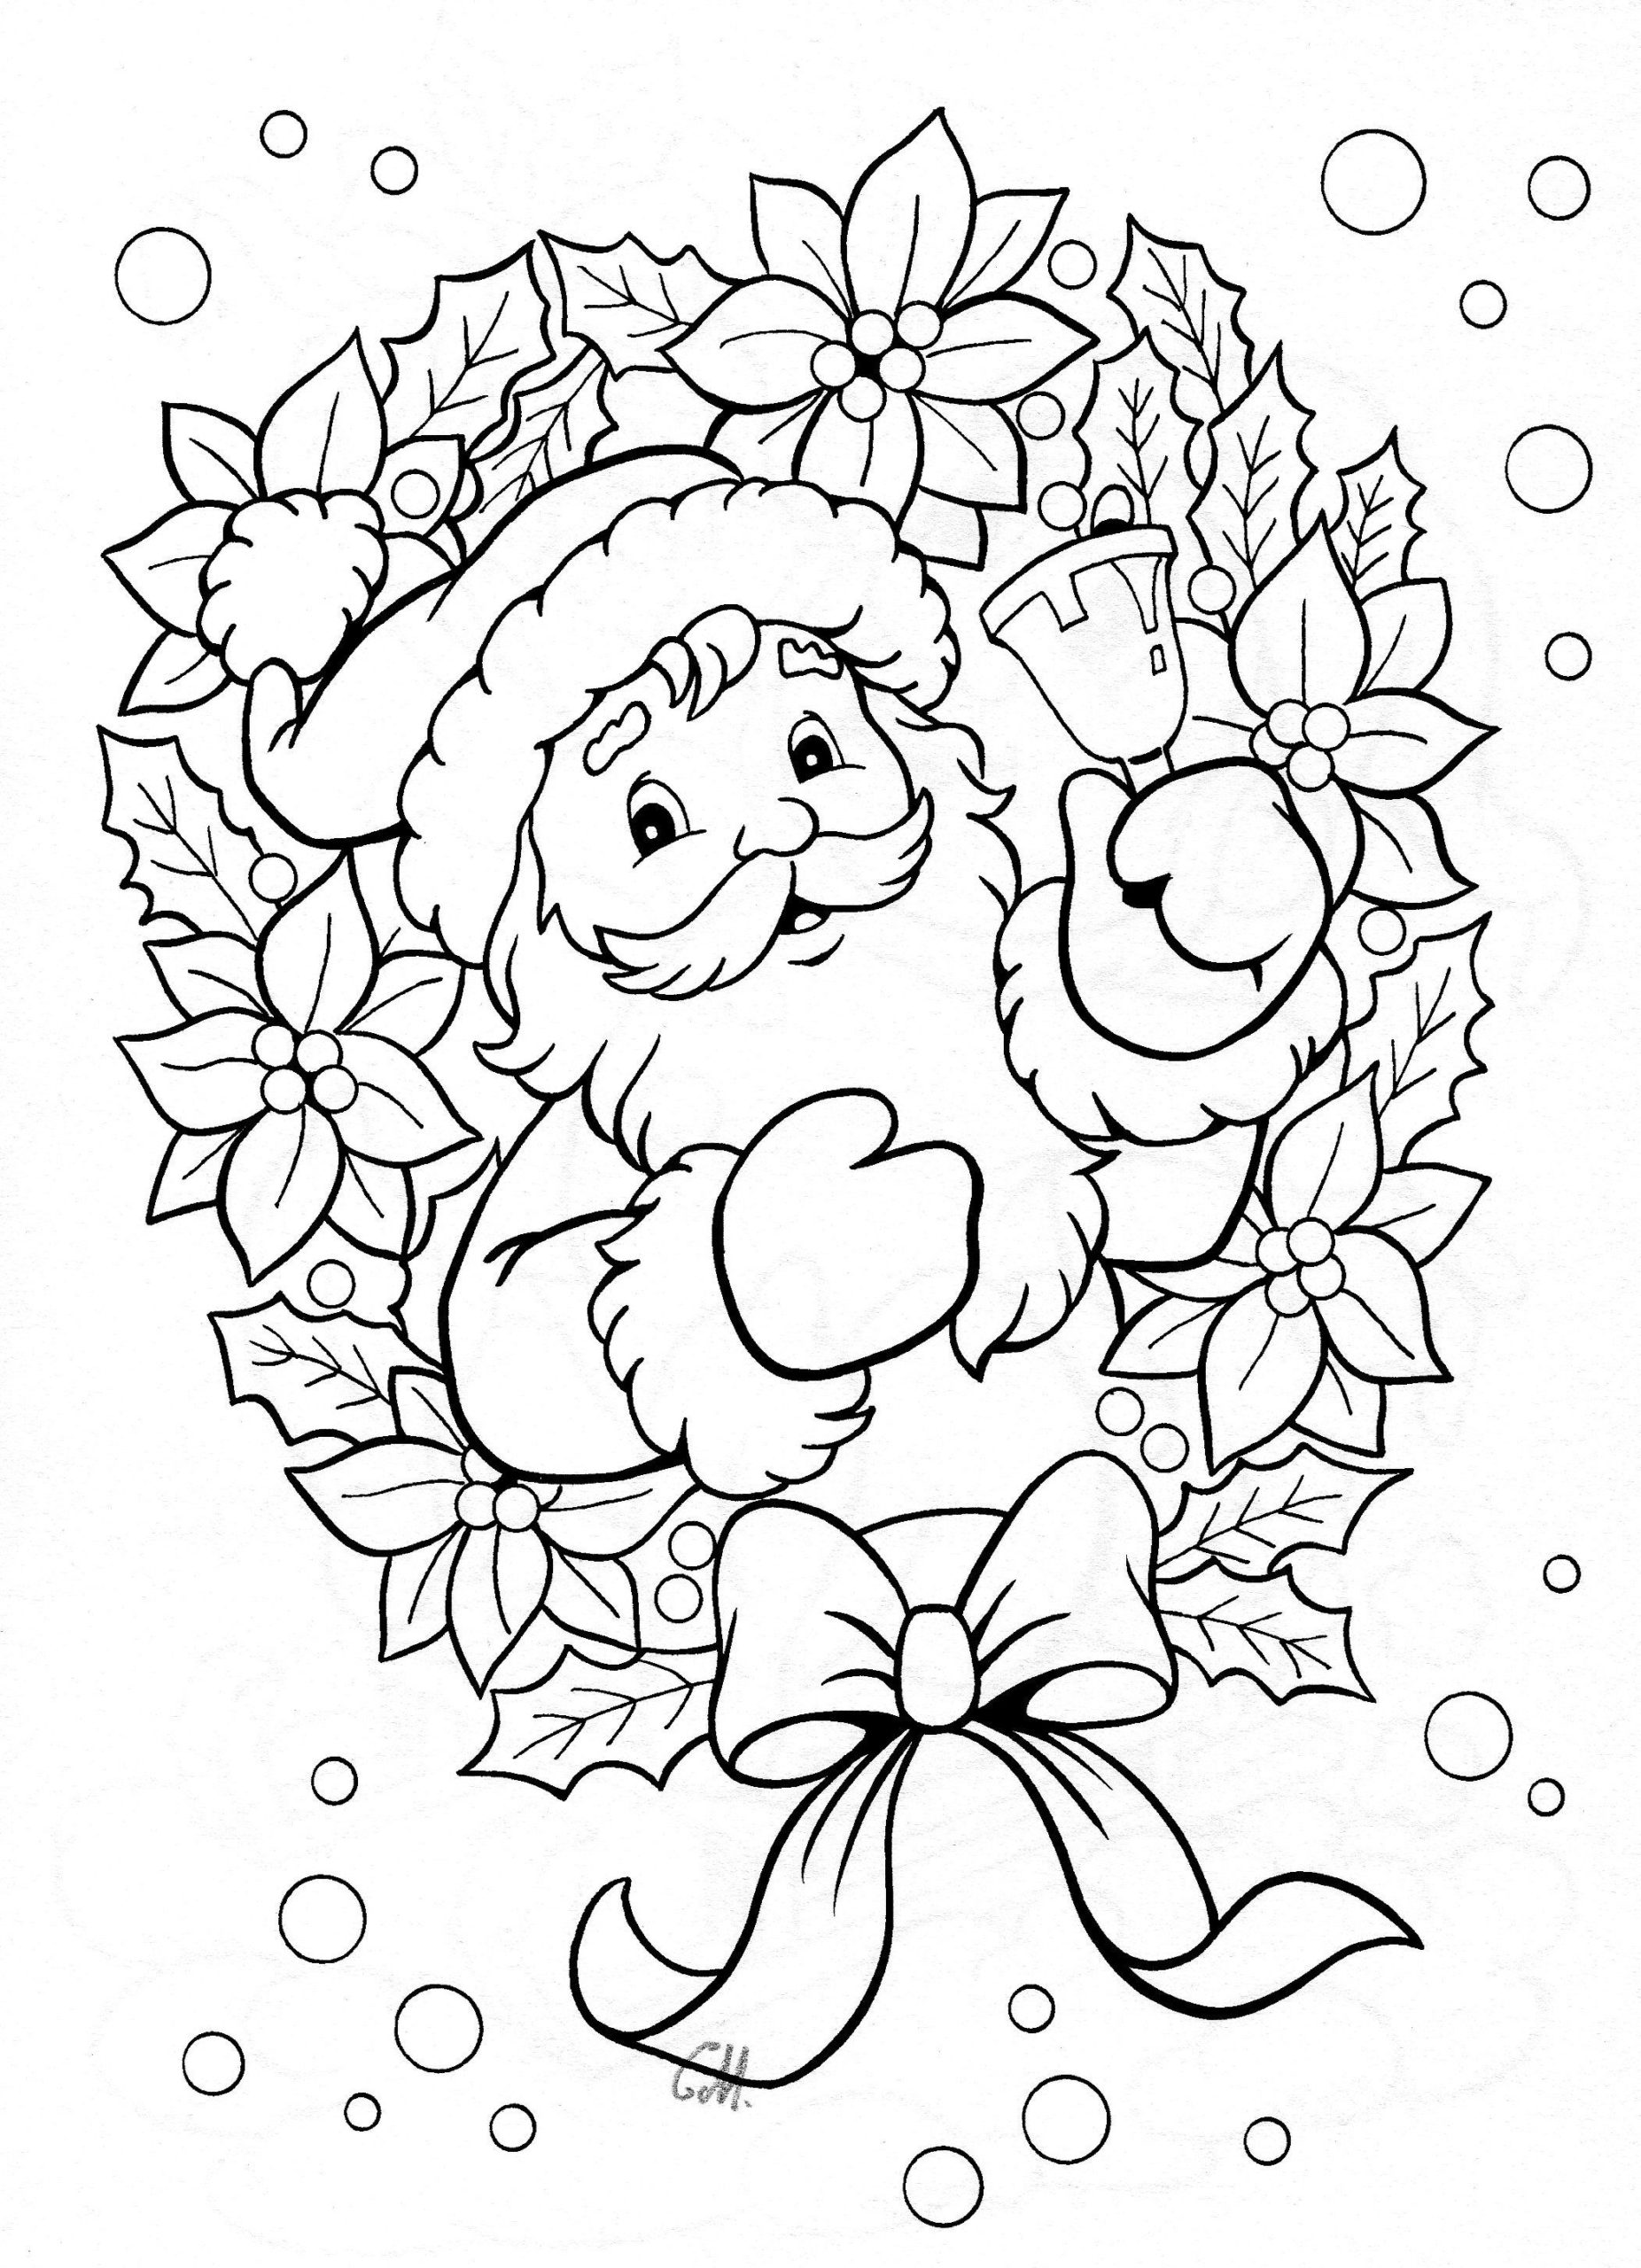 Coloring Pages : Pin By Sharon Francis On Coloring Breakfast With ...